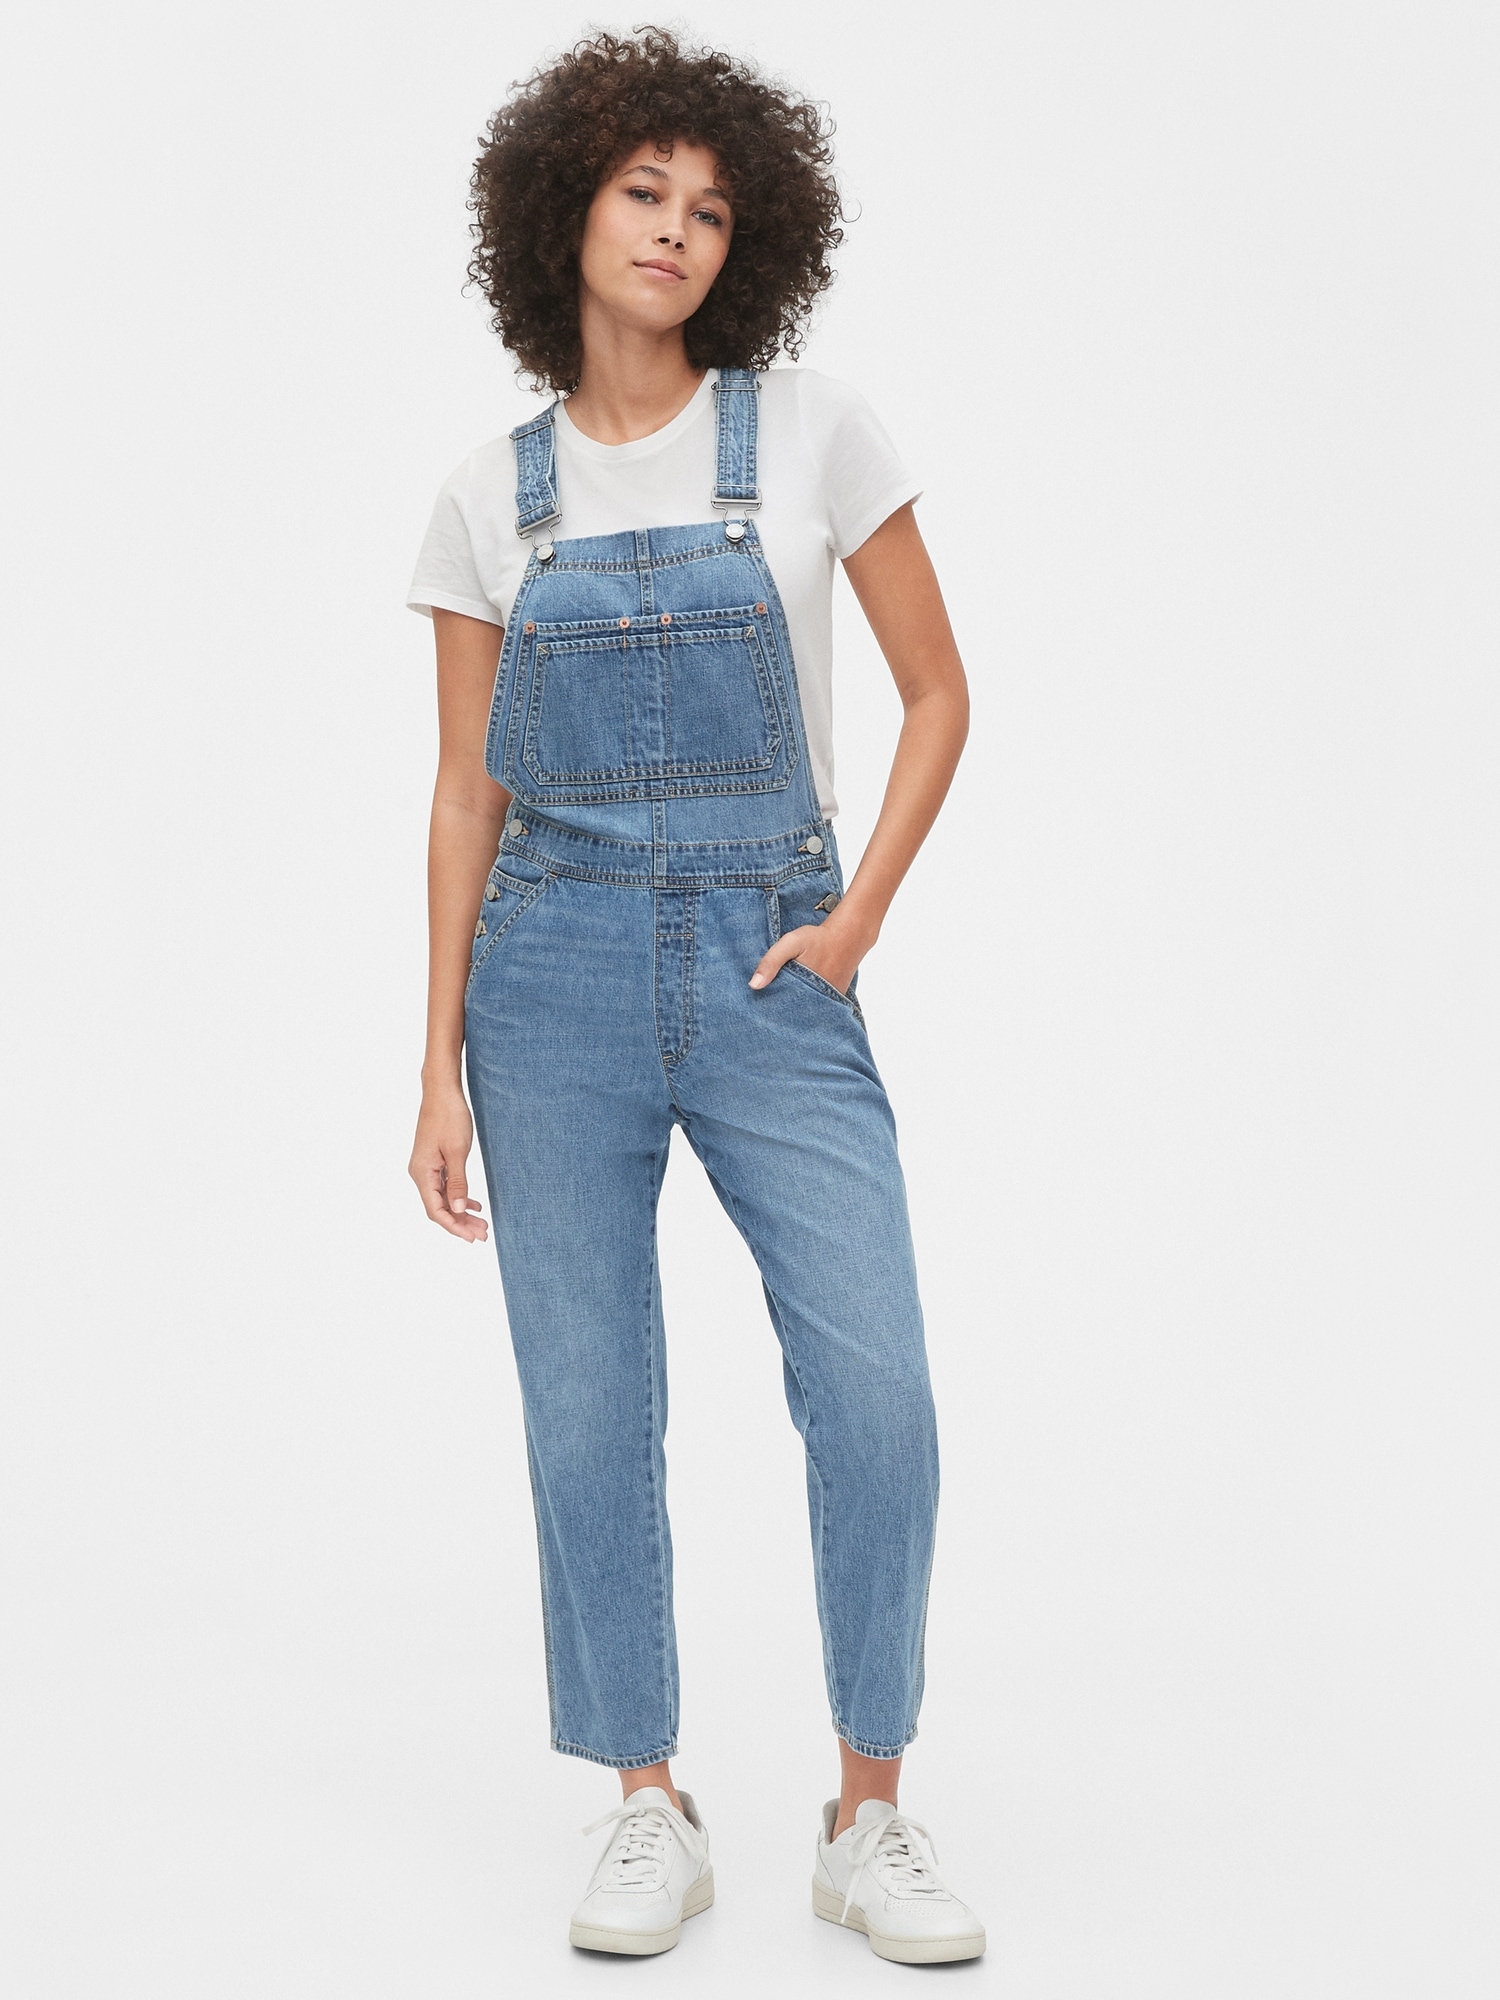 relaxed overalls